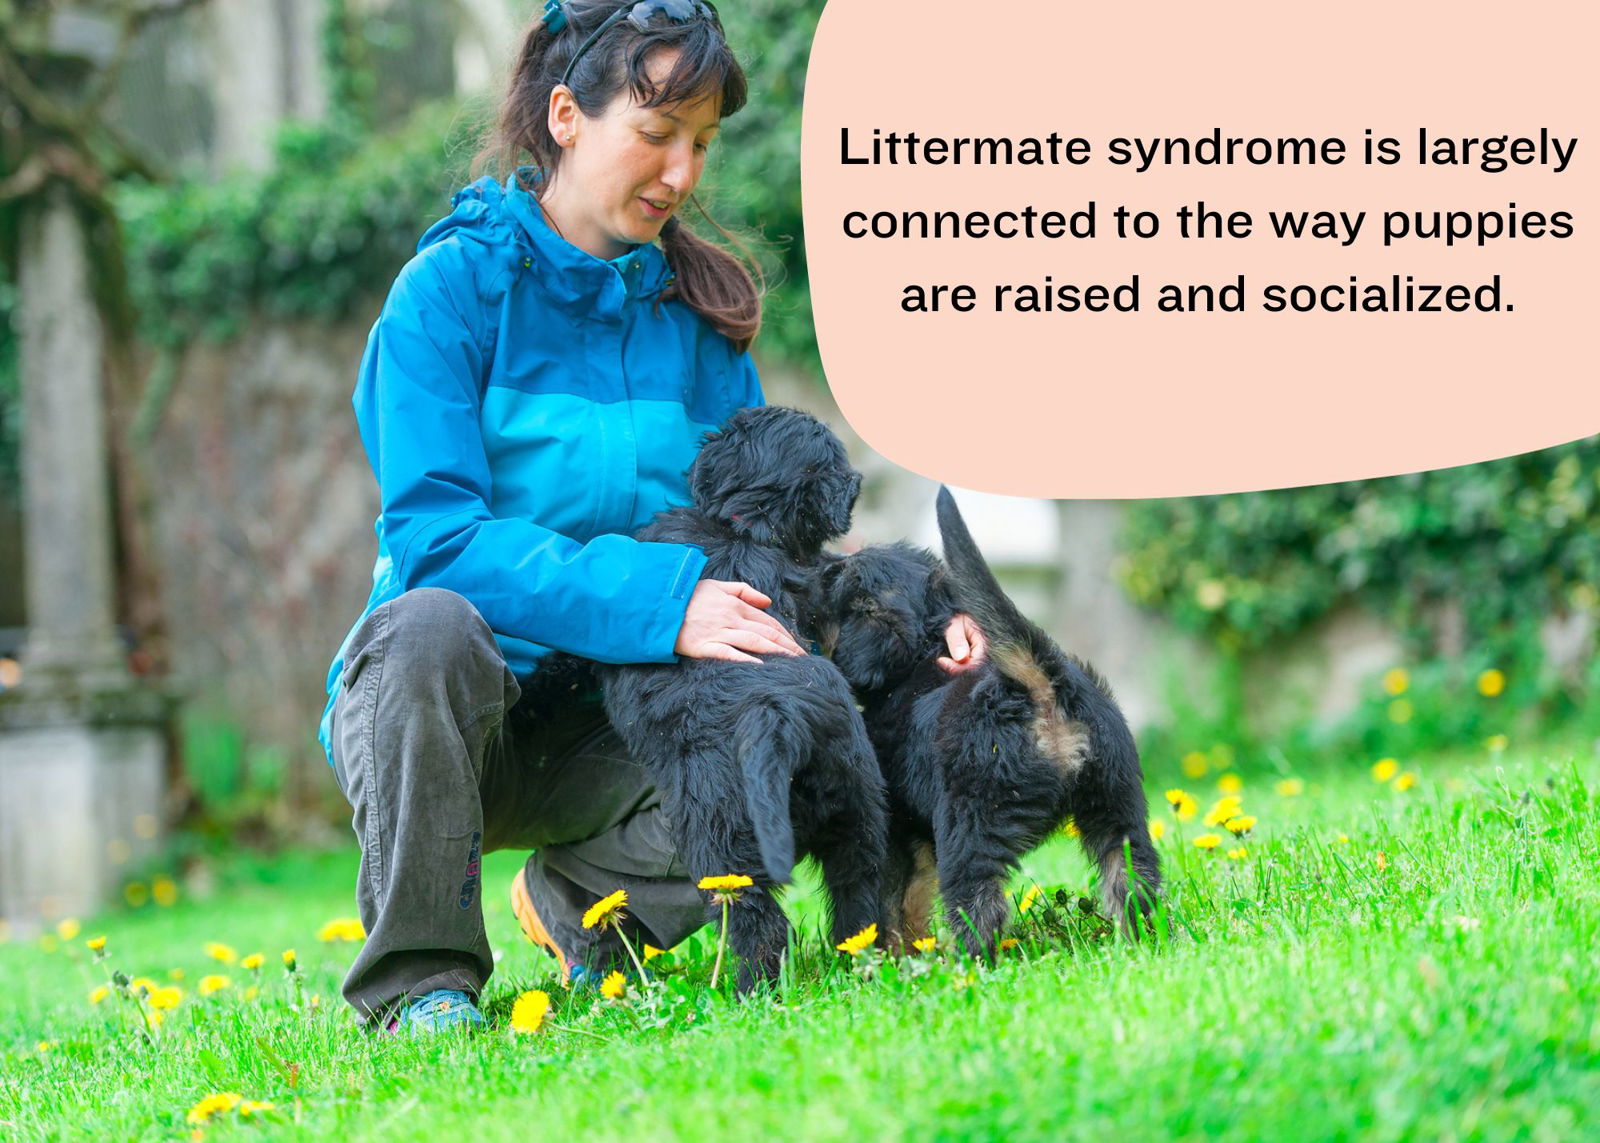 littermate syndrome is connected to the way puppies are raised and socialized